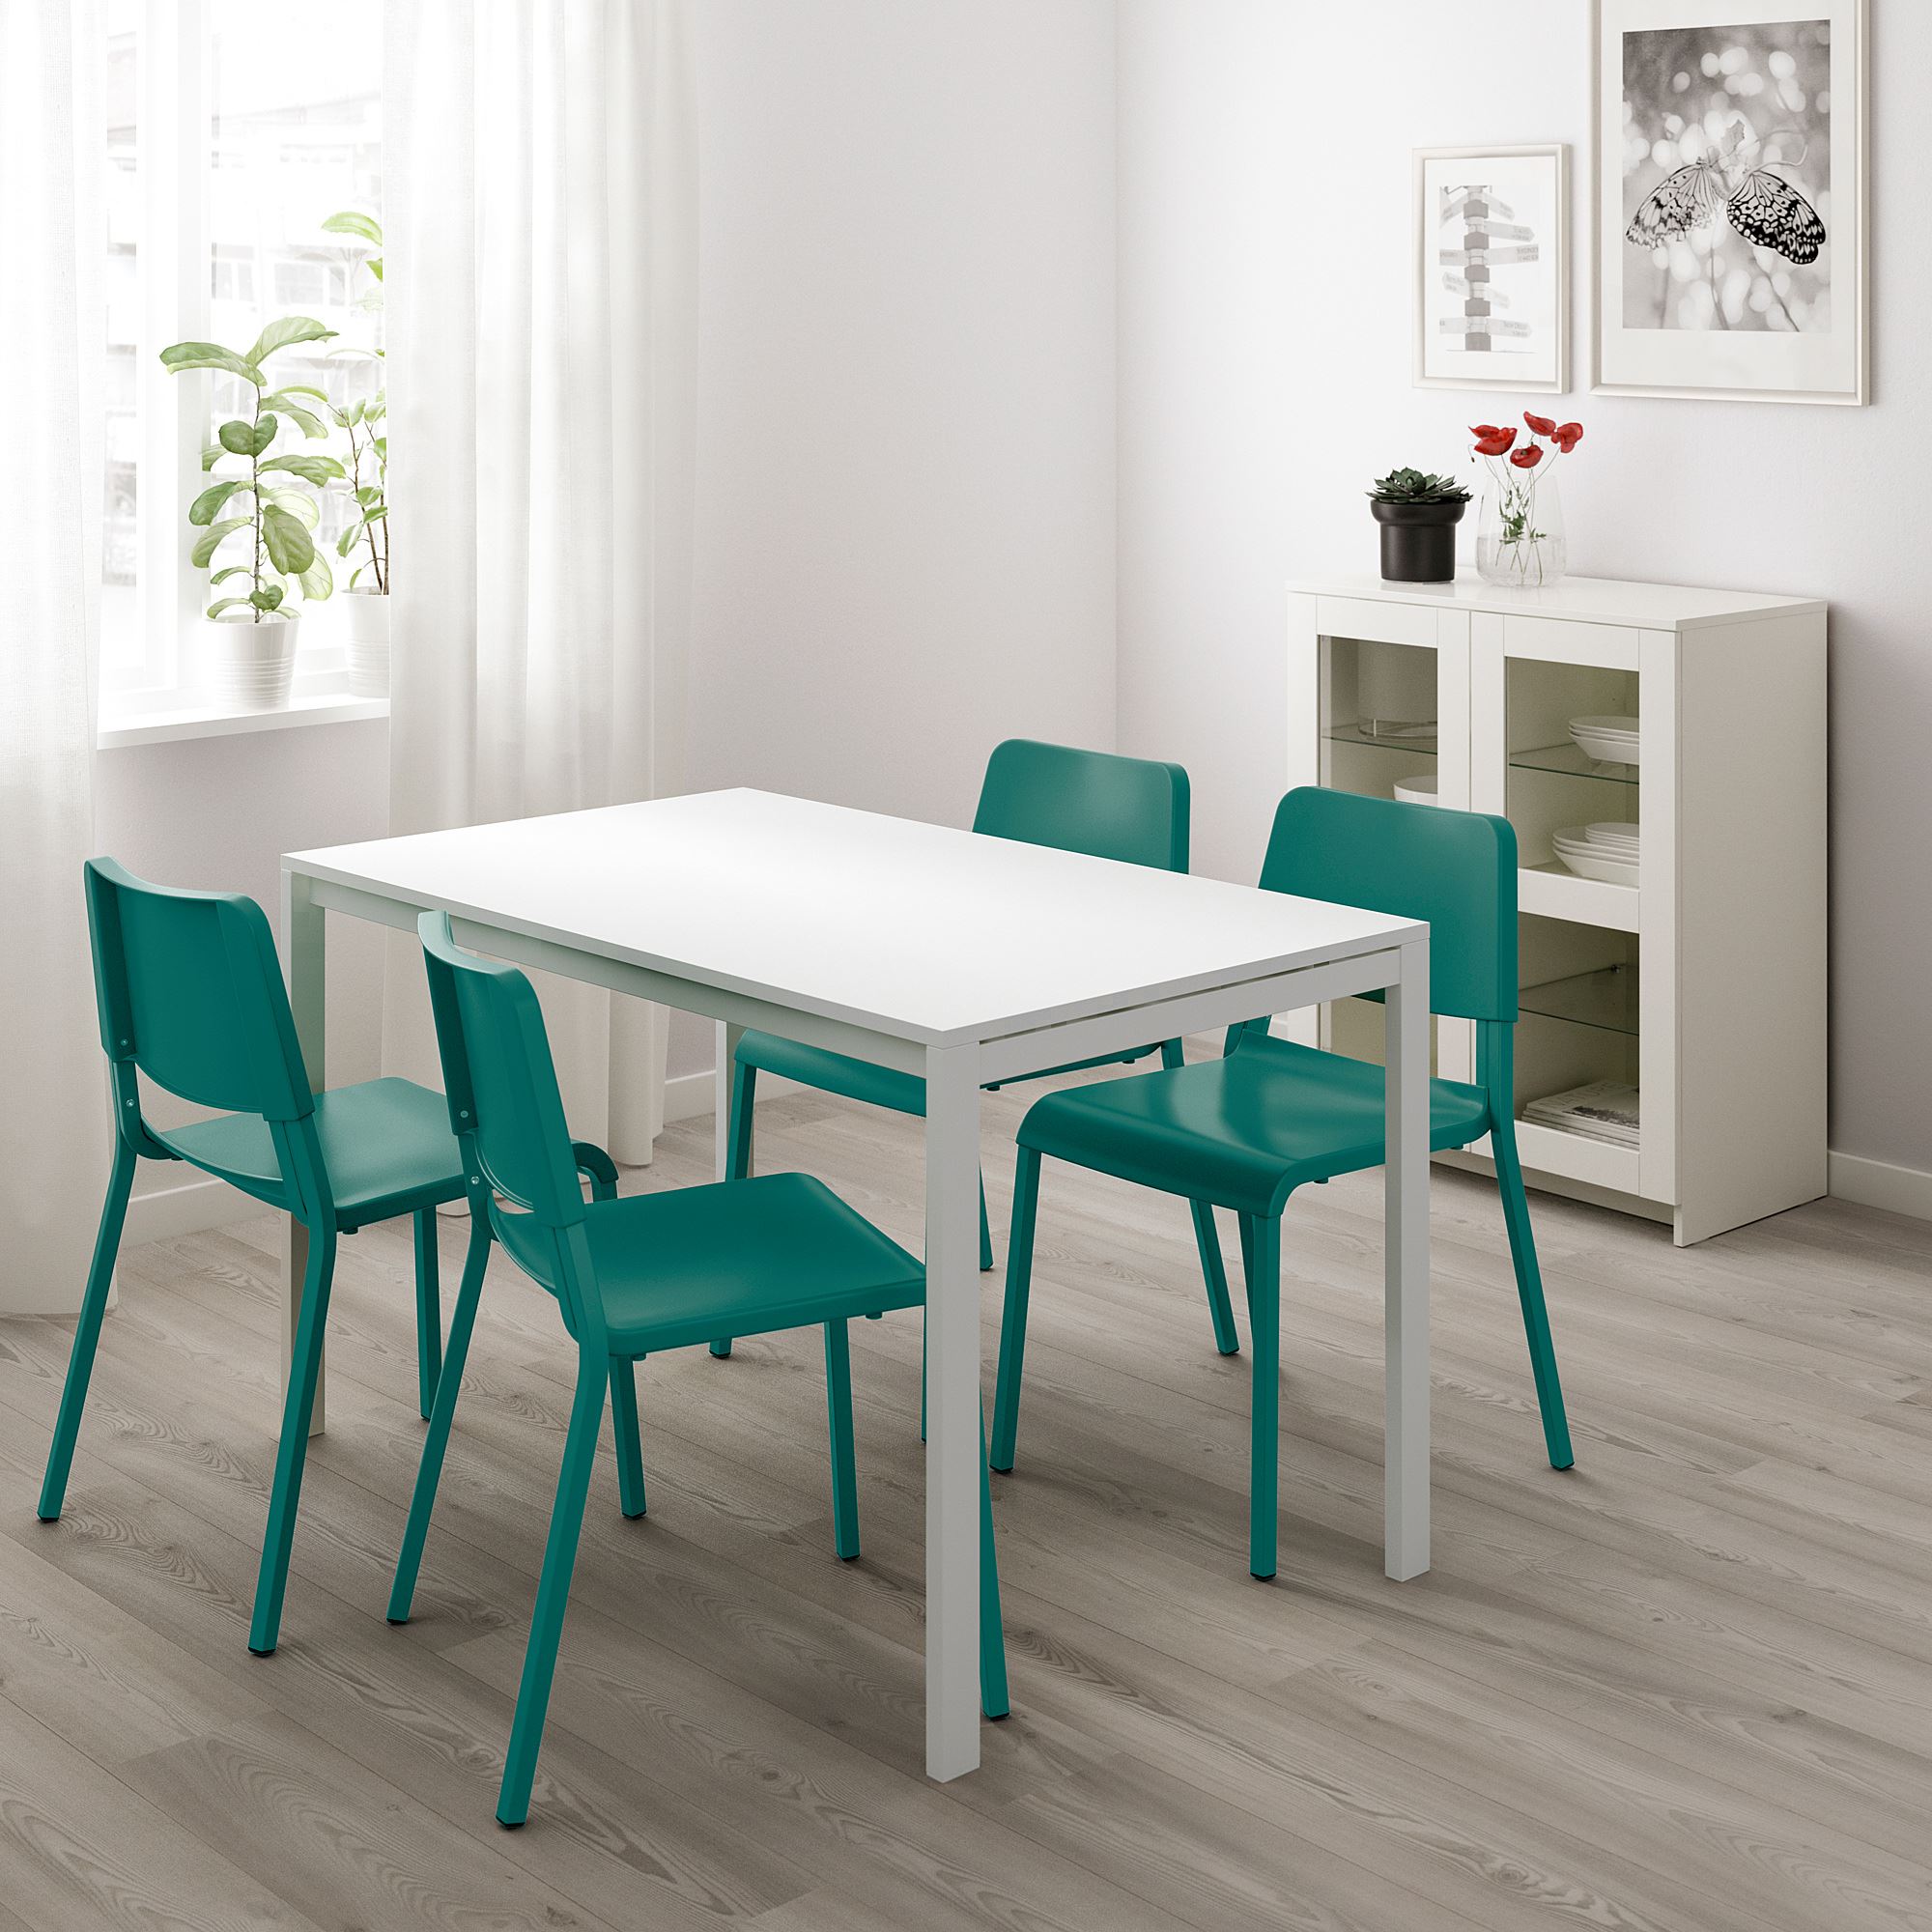 Simple Ikea Kitchen Tables for Large Space